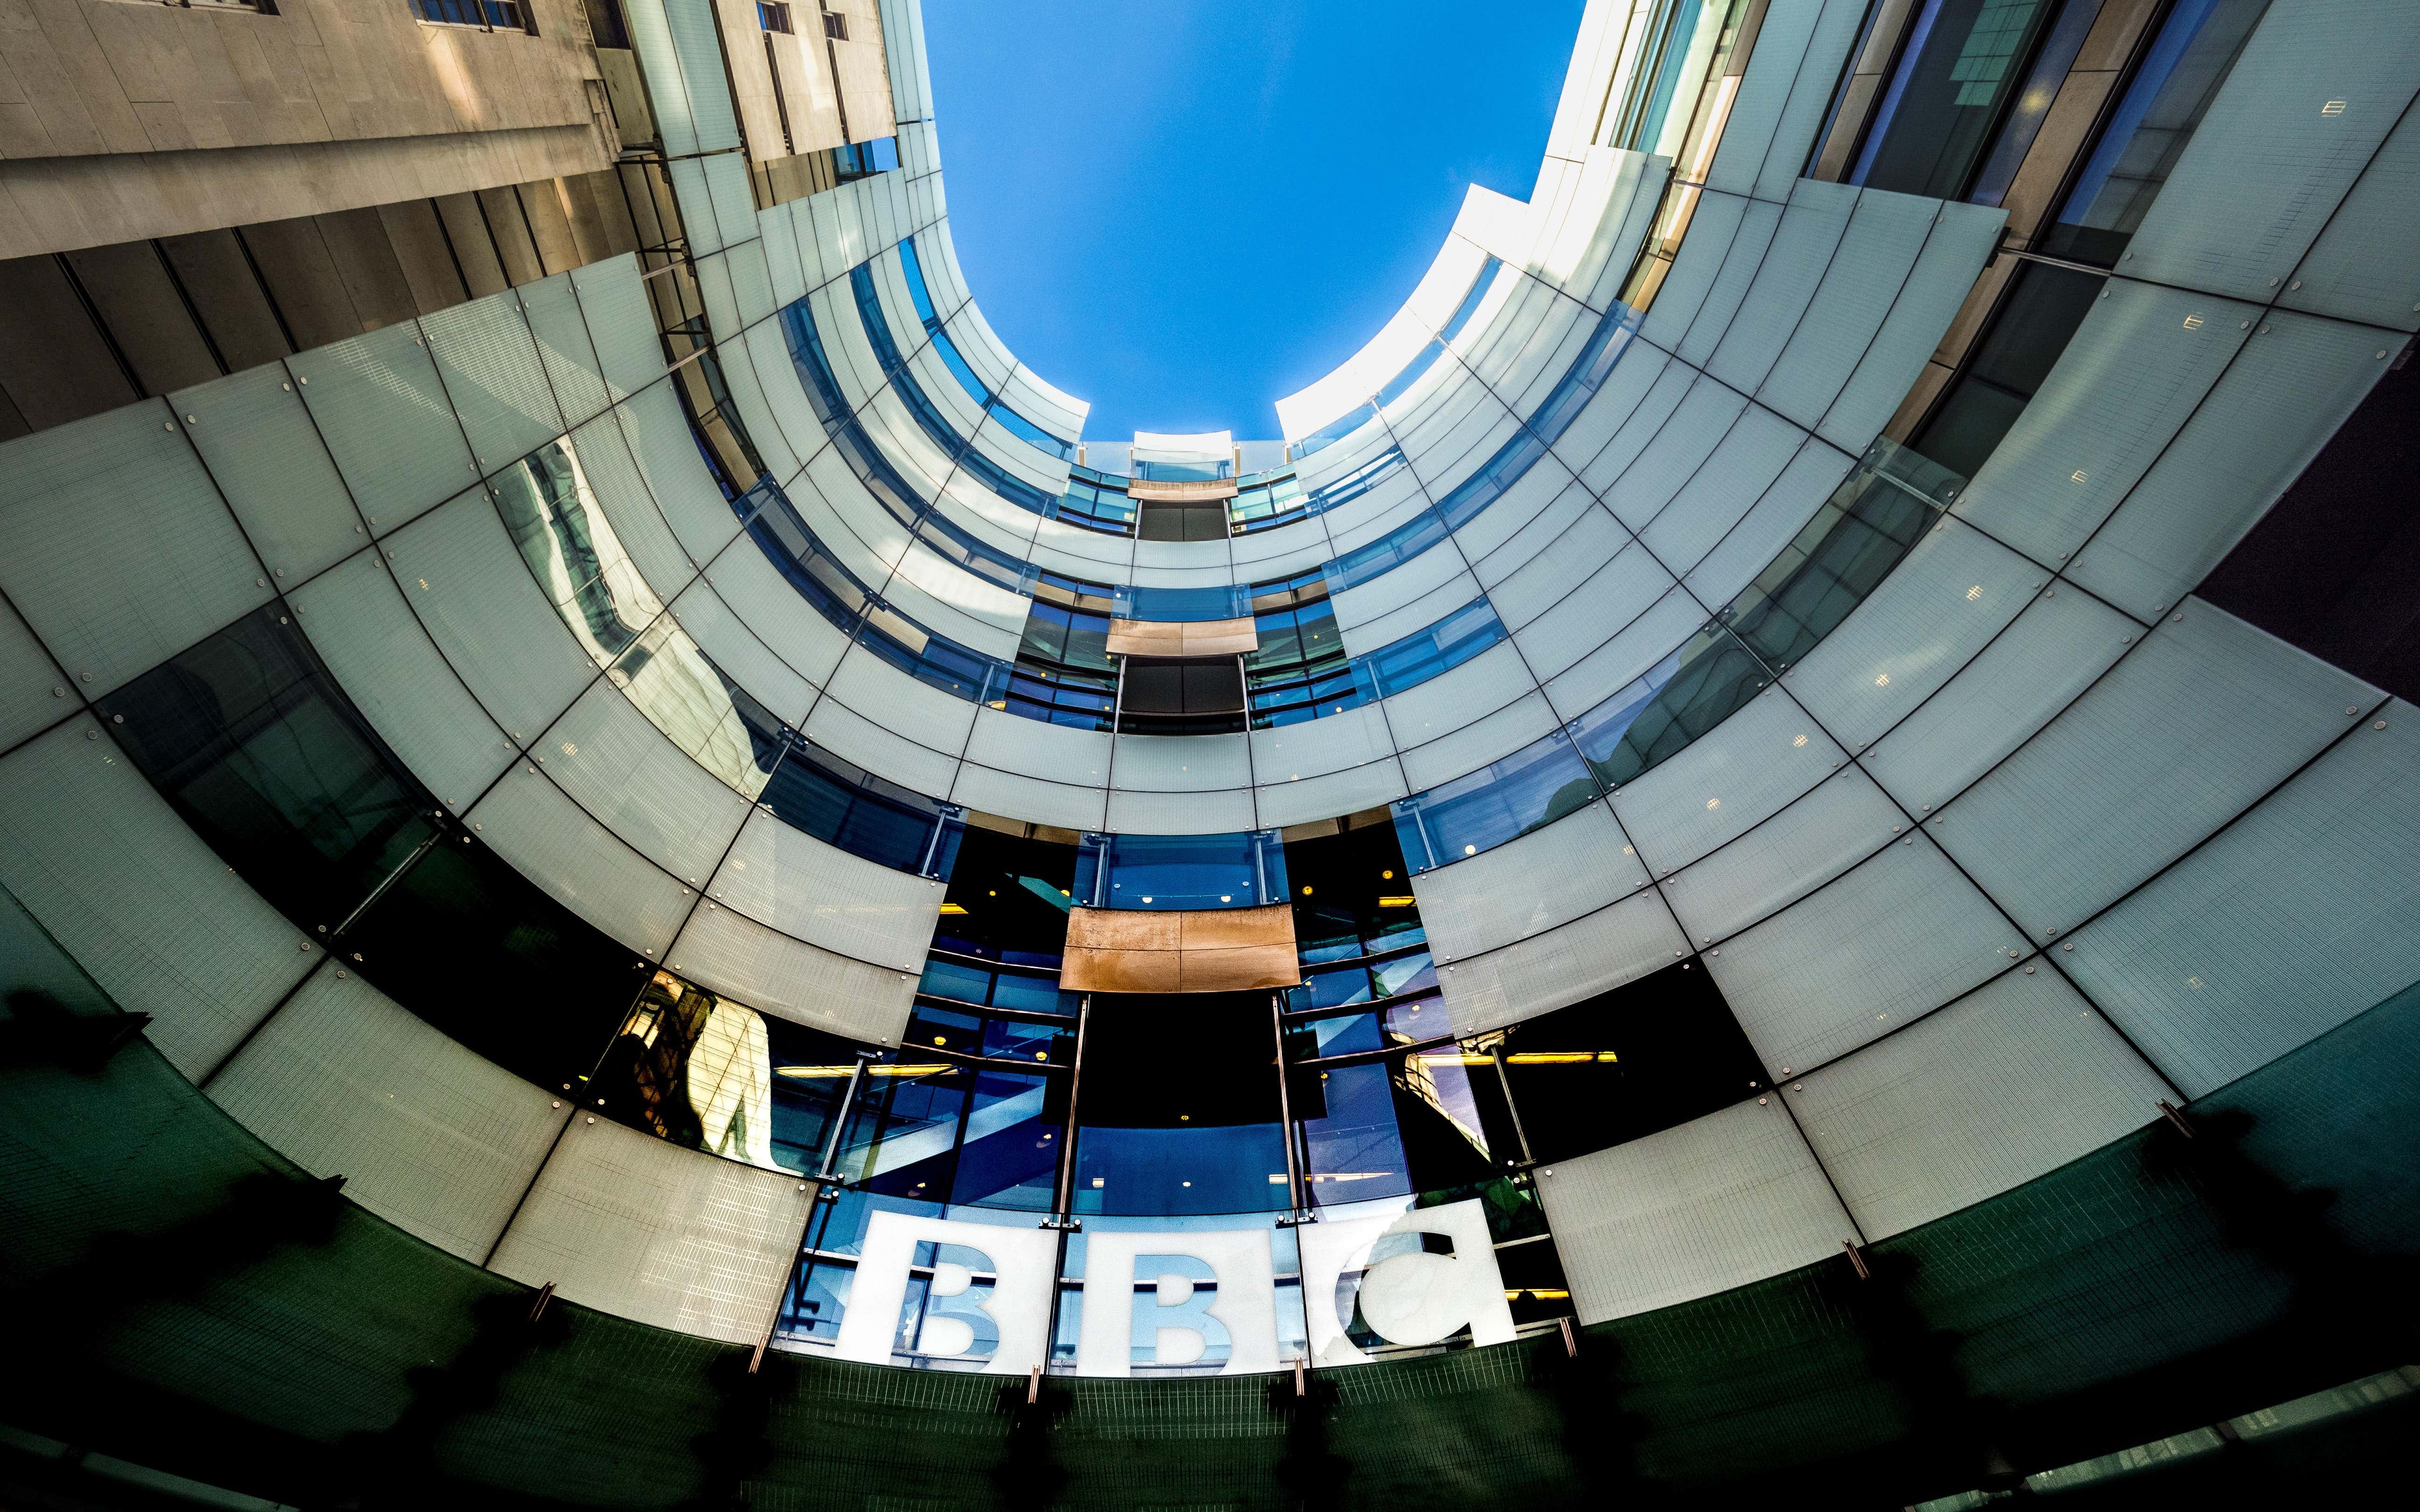 Application process for BBC jobs was rigged, presenters tell tribunal